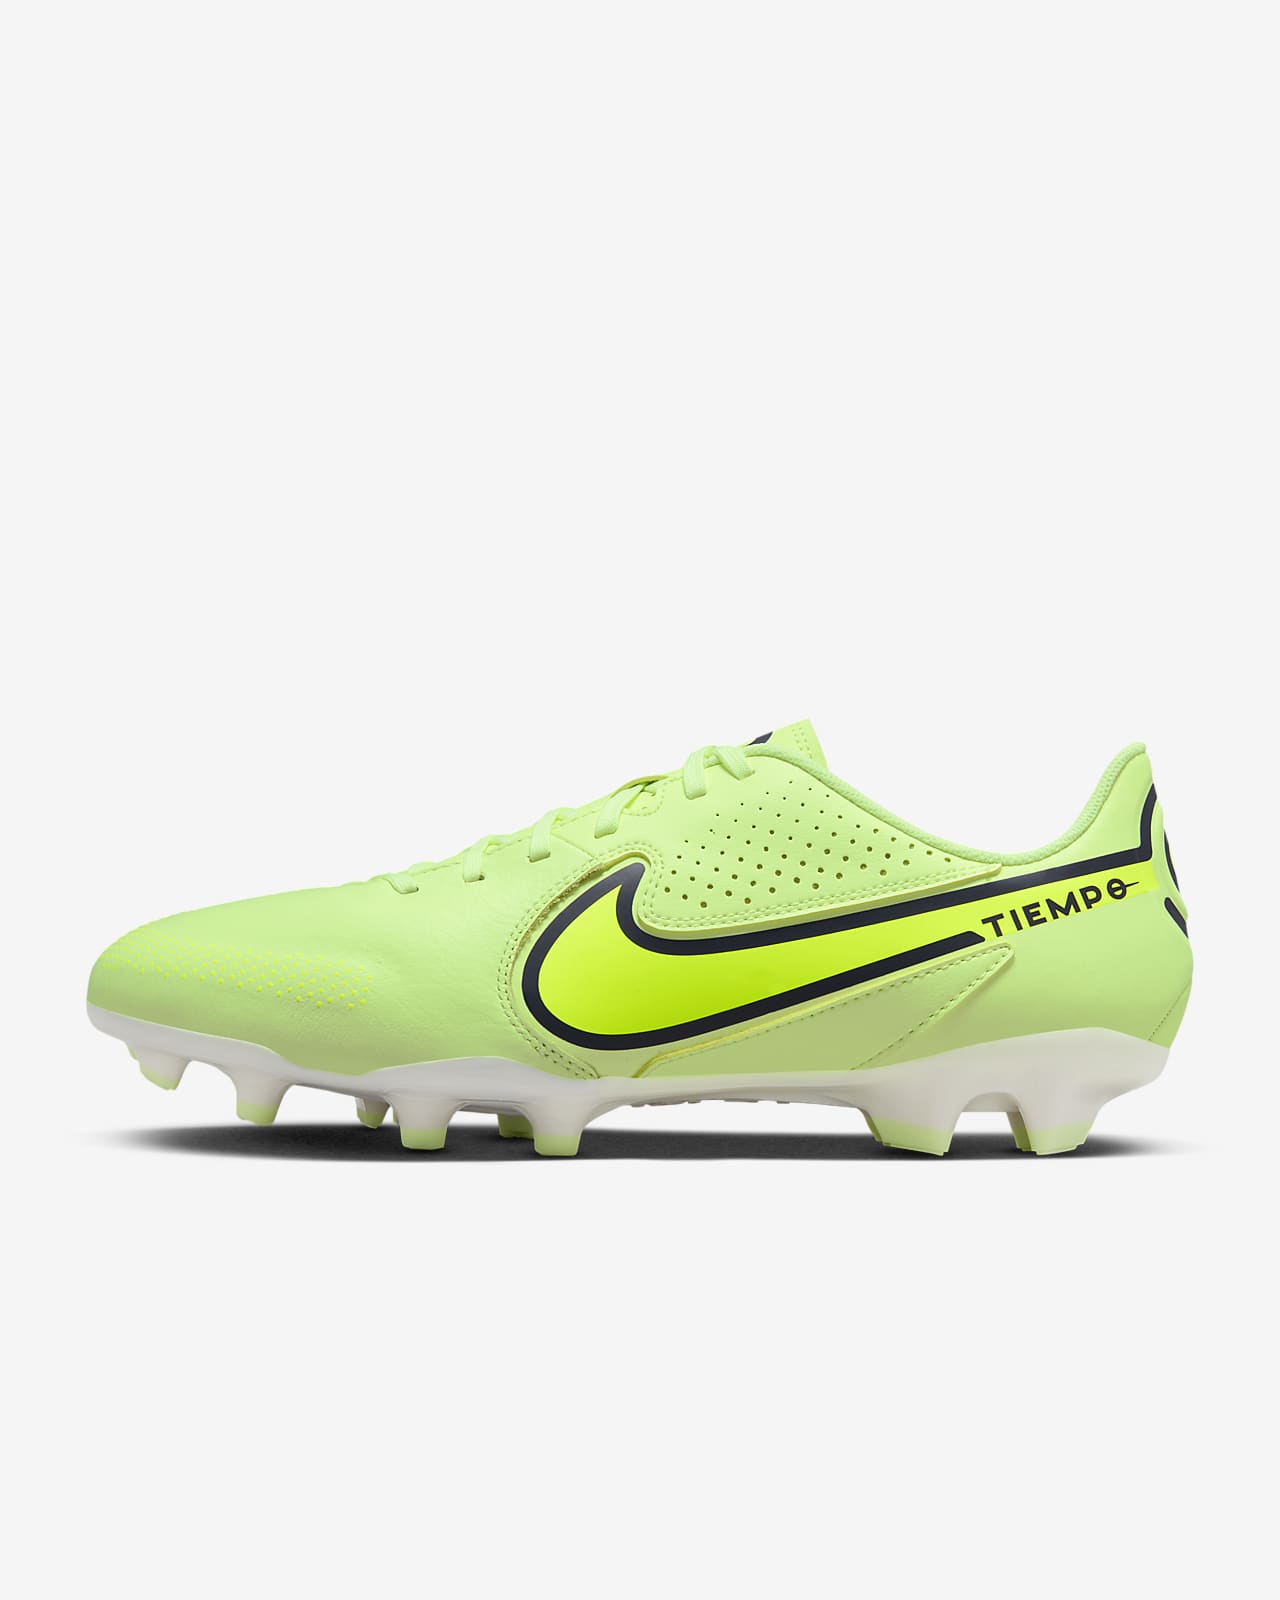 Nike Tiempo Legend 9 Academy MG Multi-Ground Soccer Cleats.